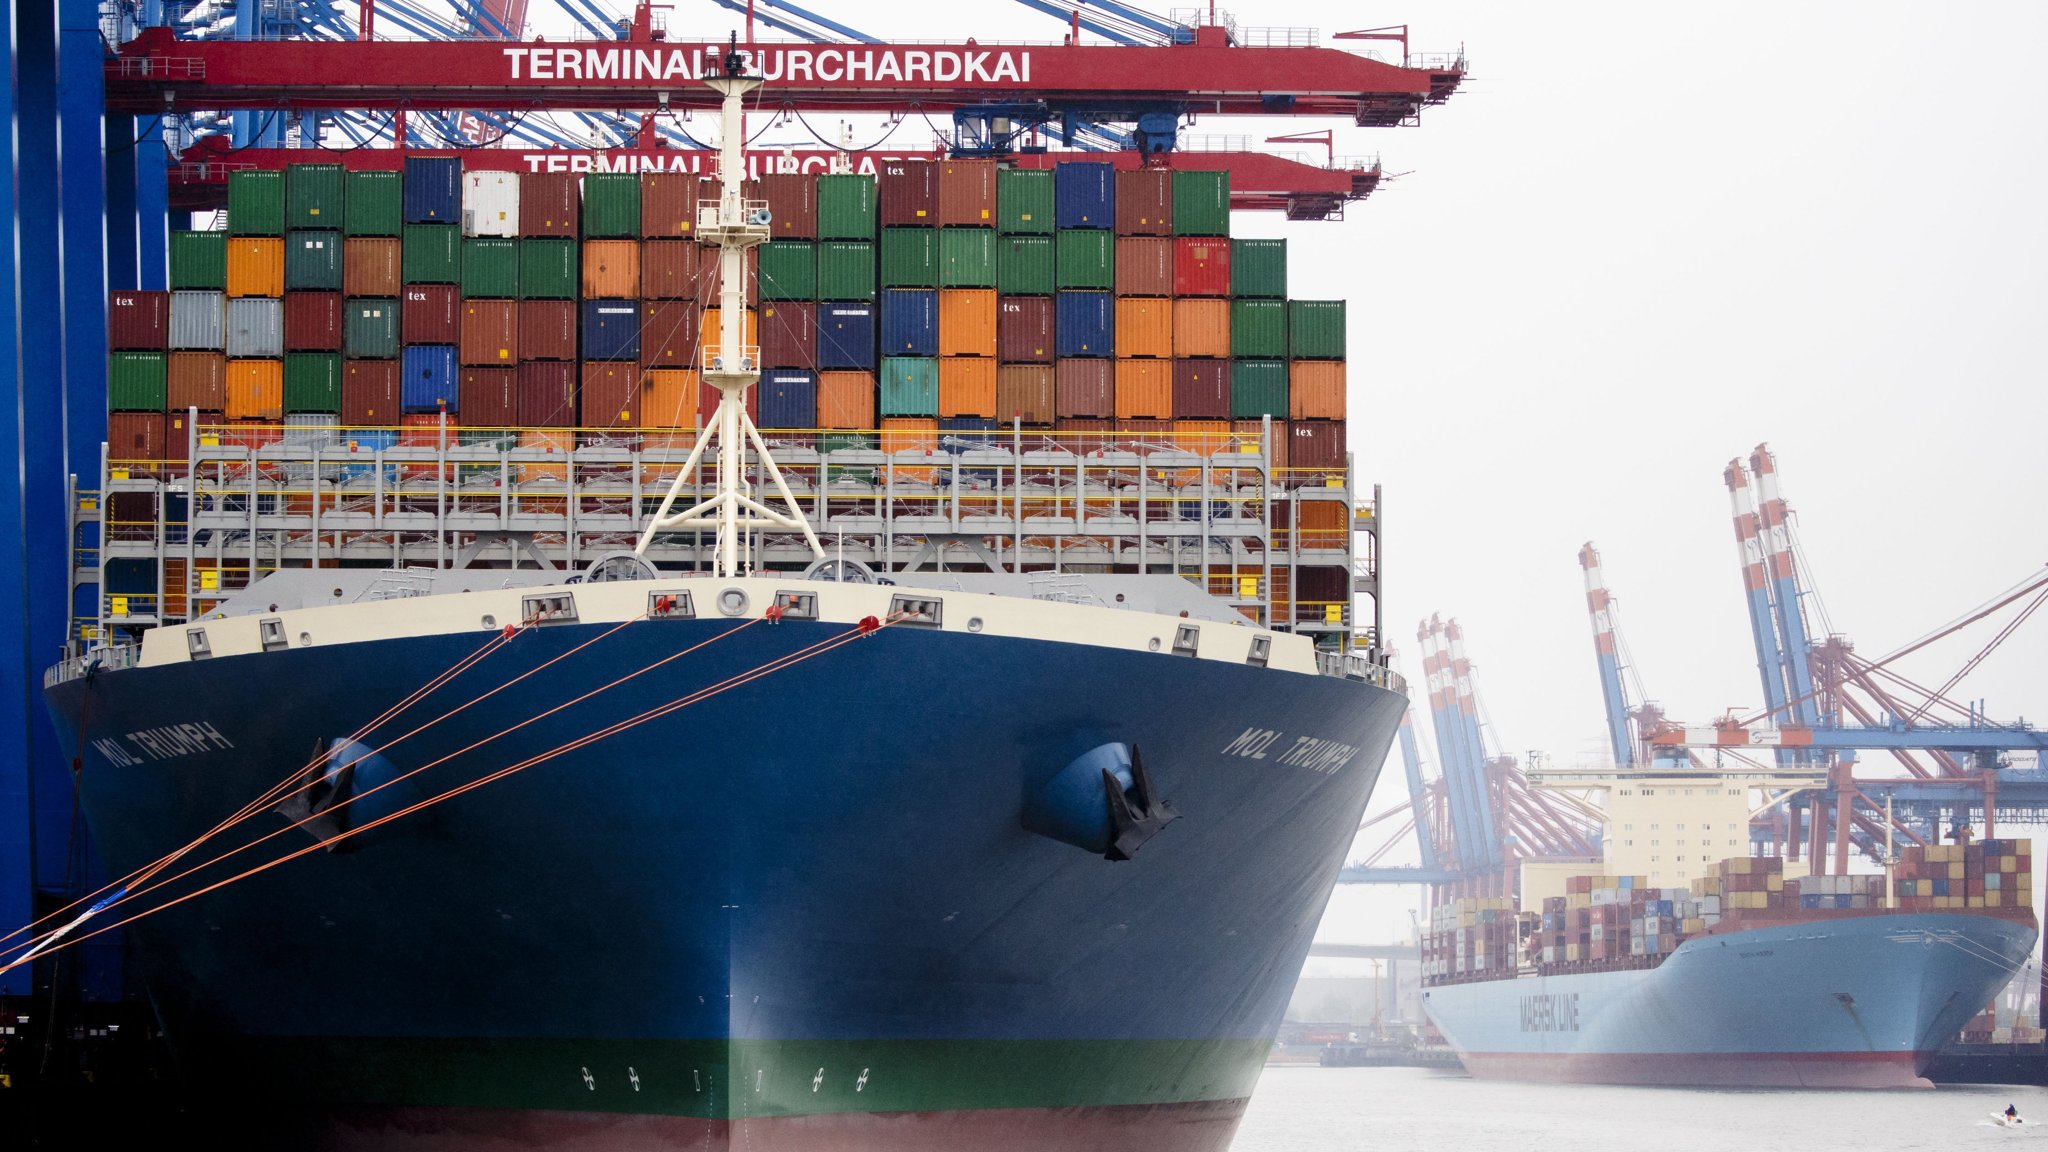 Reduced appetite for ultra large ships will benefit shipping industry — Drewry 